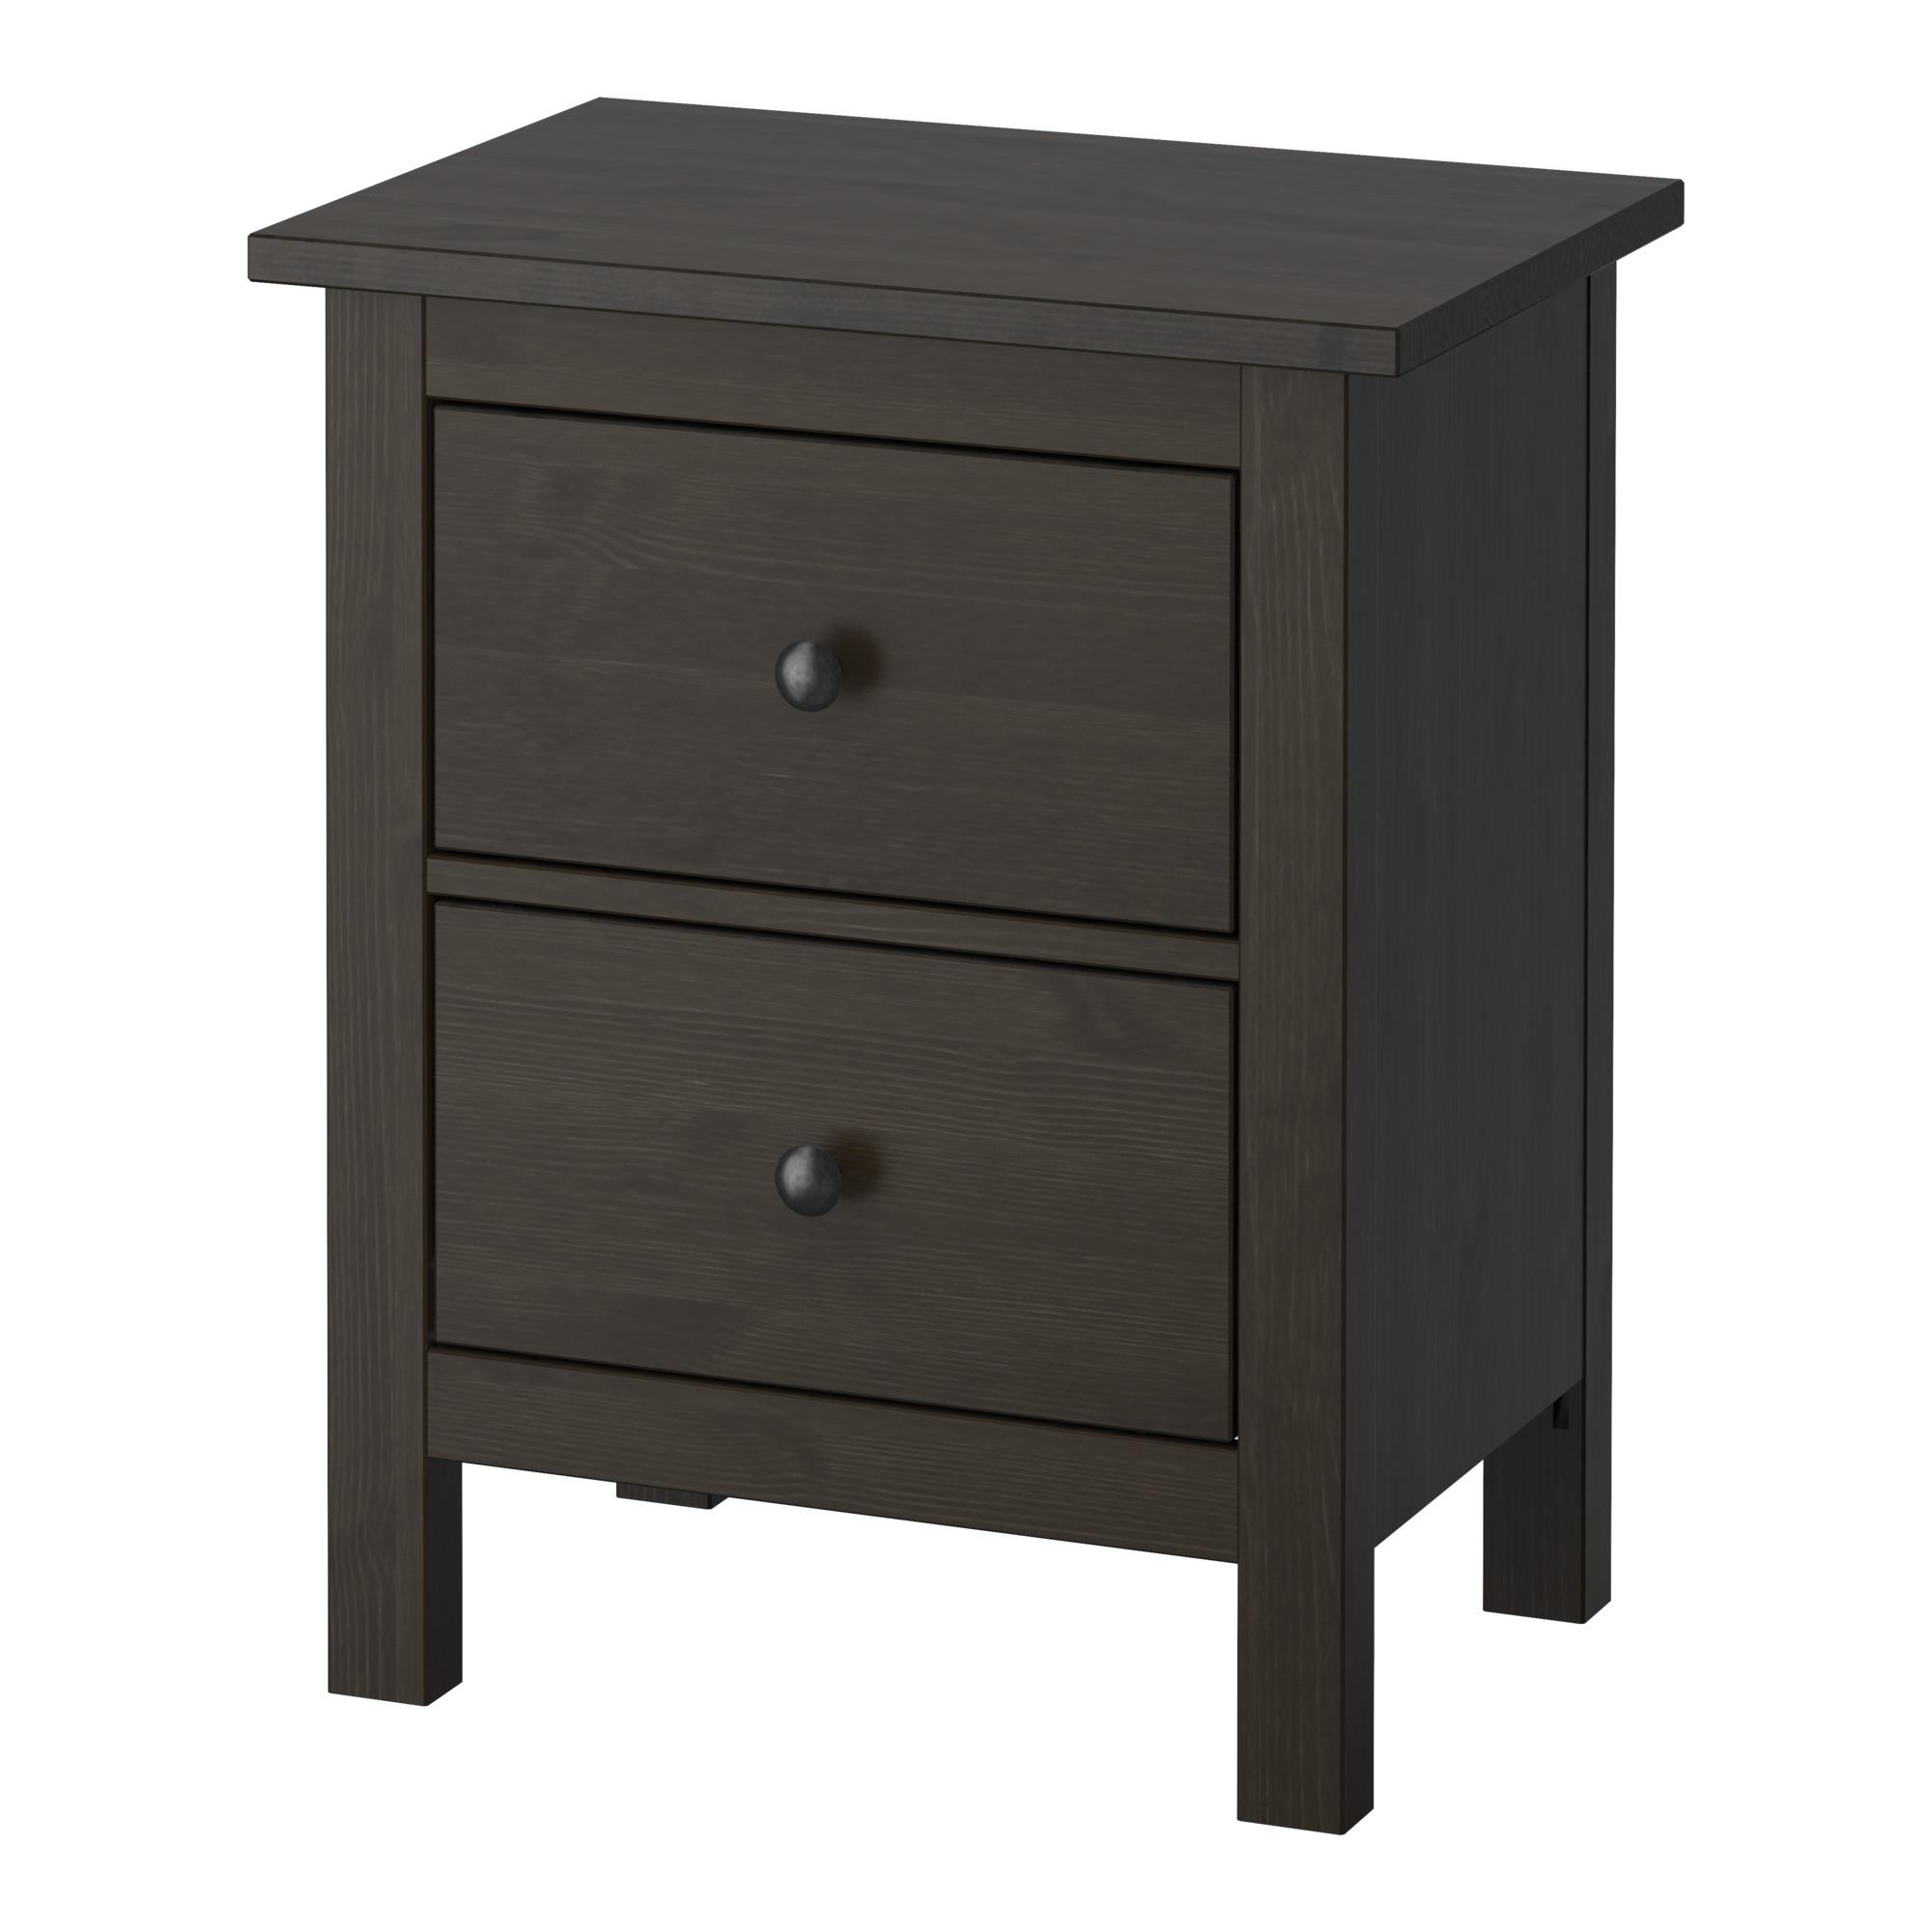 beautiful black sonoma tall drawer nightstand lorraine espresso sauder prepac calla stand wooden char wood edenvale washed plans furniture night soft enchanting white two